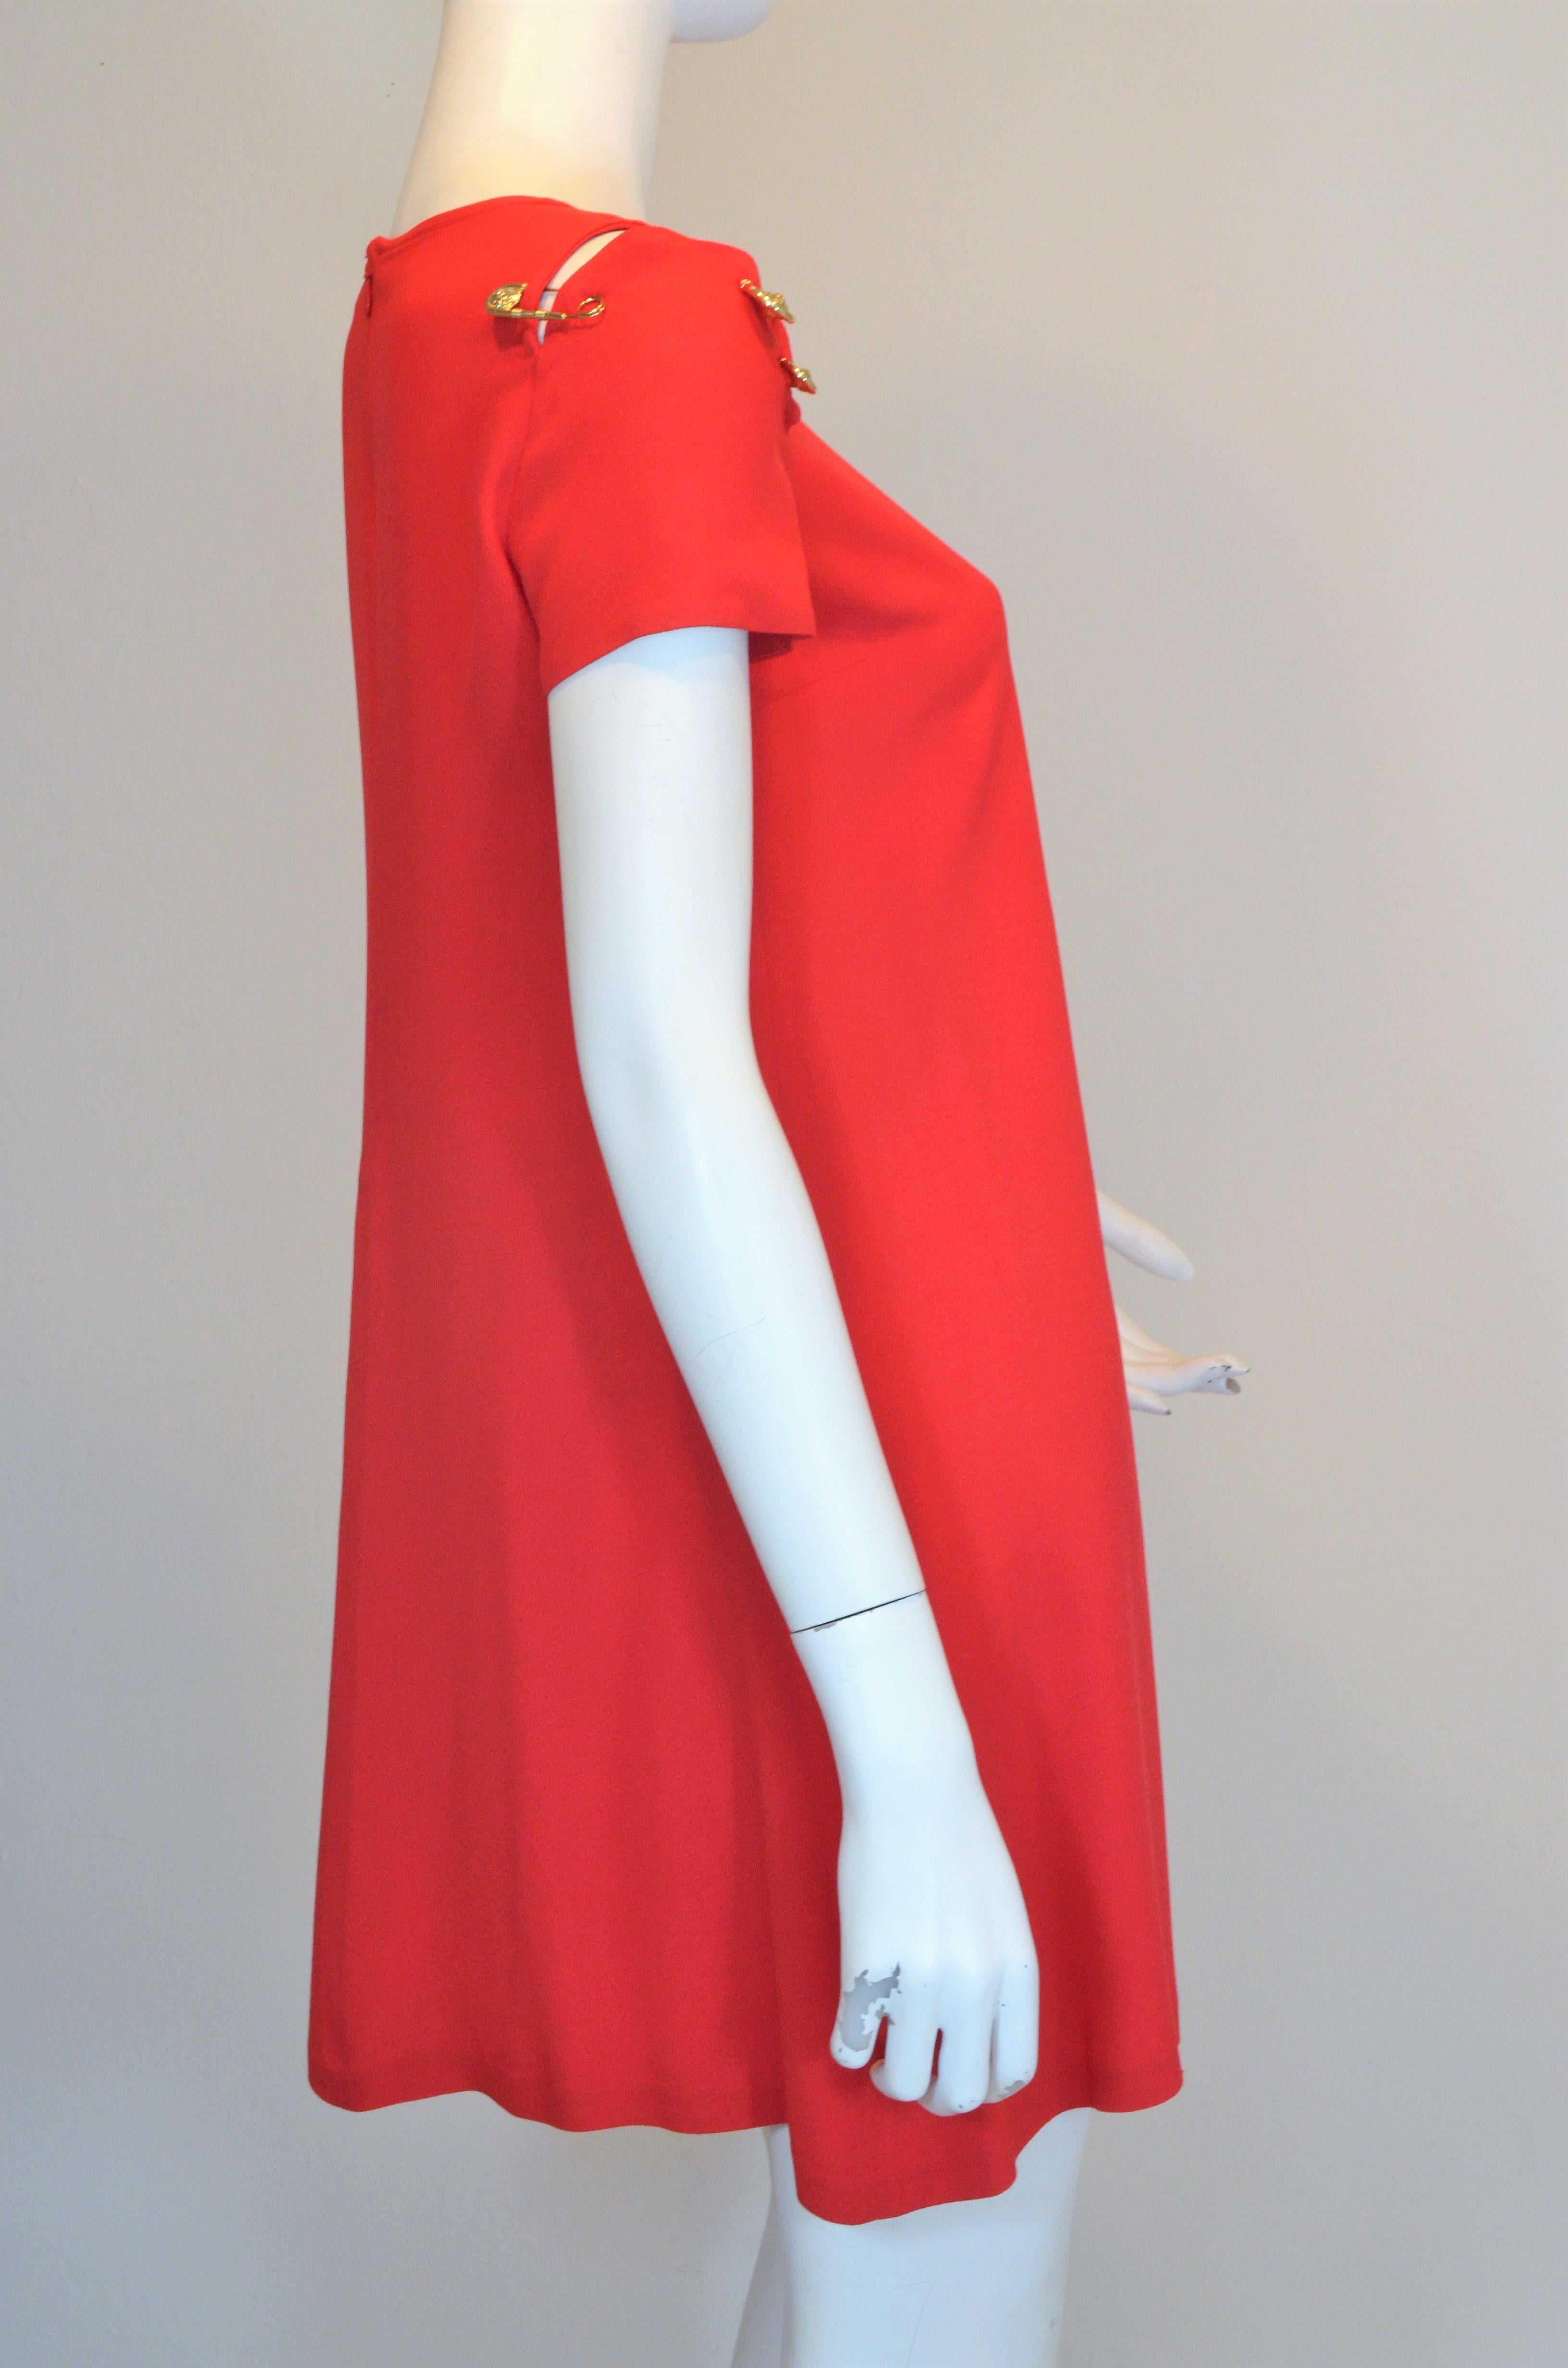 Gianni Versace VERSUS Red crepe dress features an a-line design with gold, signature Medusa safety pins attached at the shoulder that can also be removed and used as a brooch. Dress has a back zipper fastening, labeled size 40, made in Bulgaria,